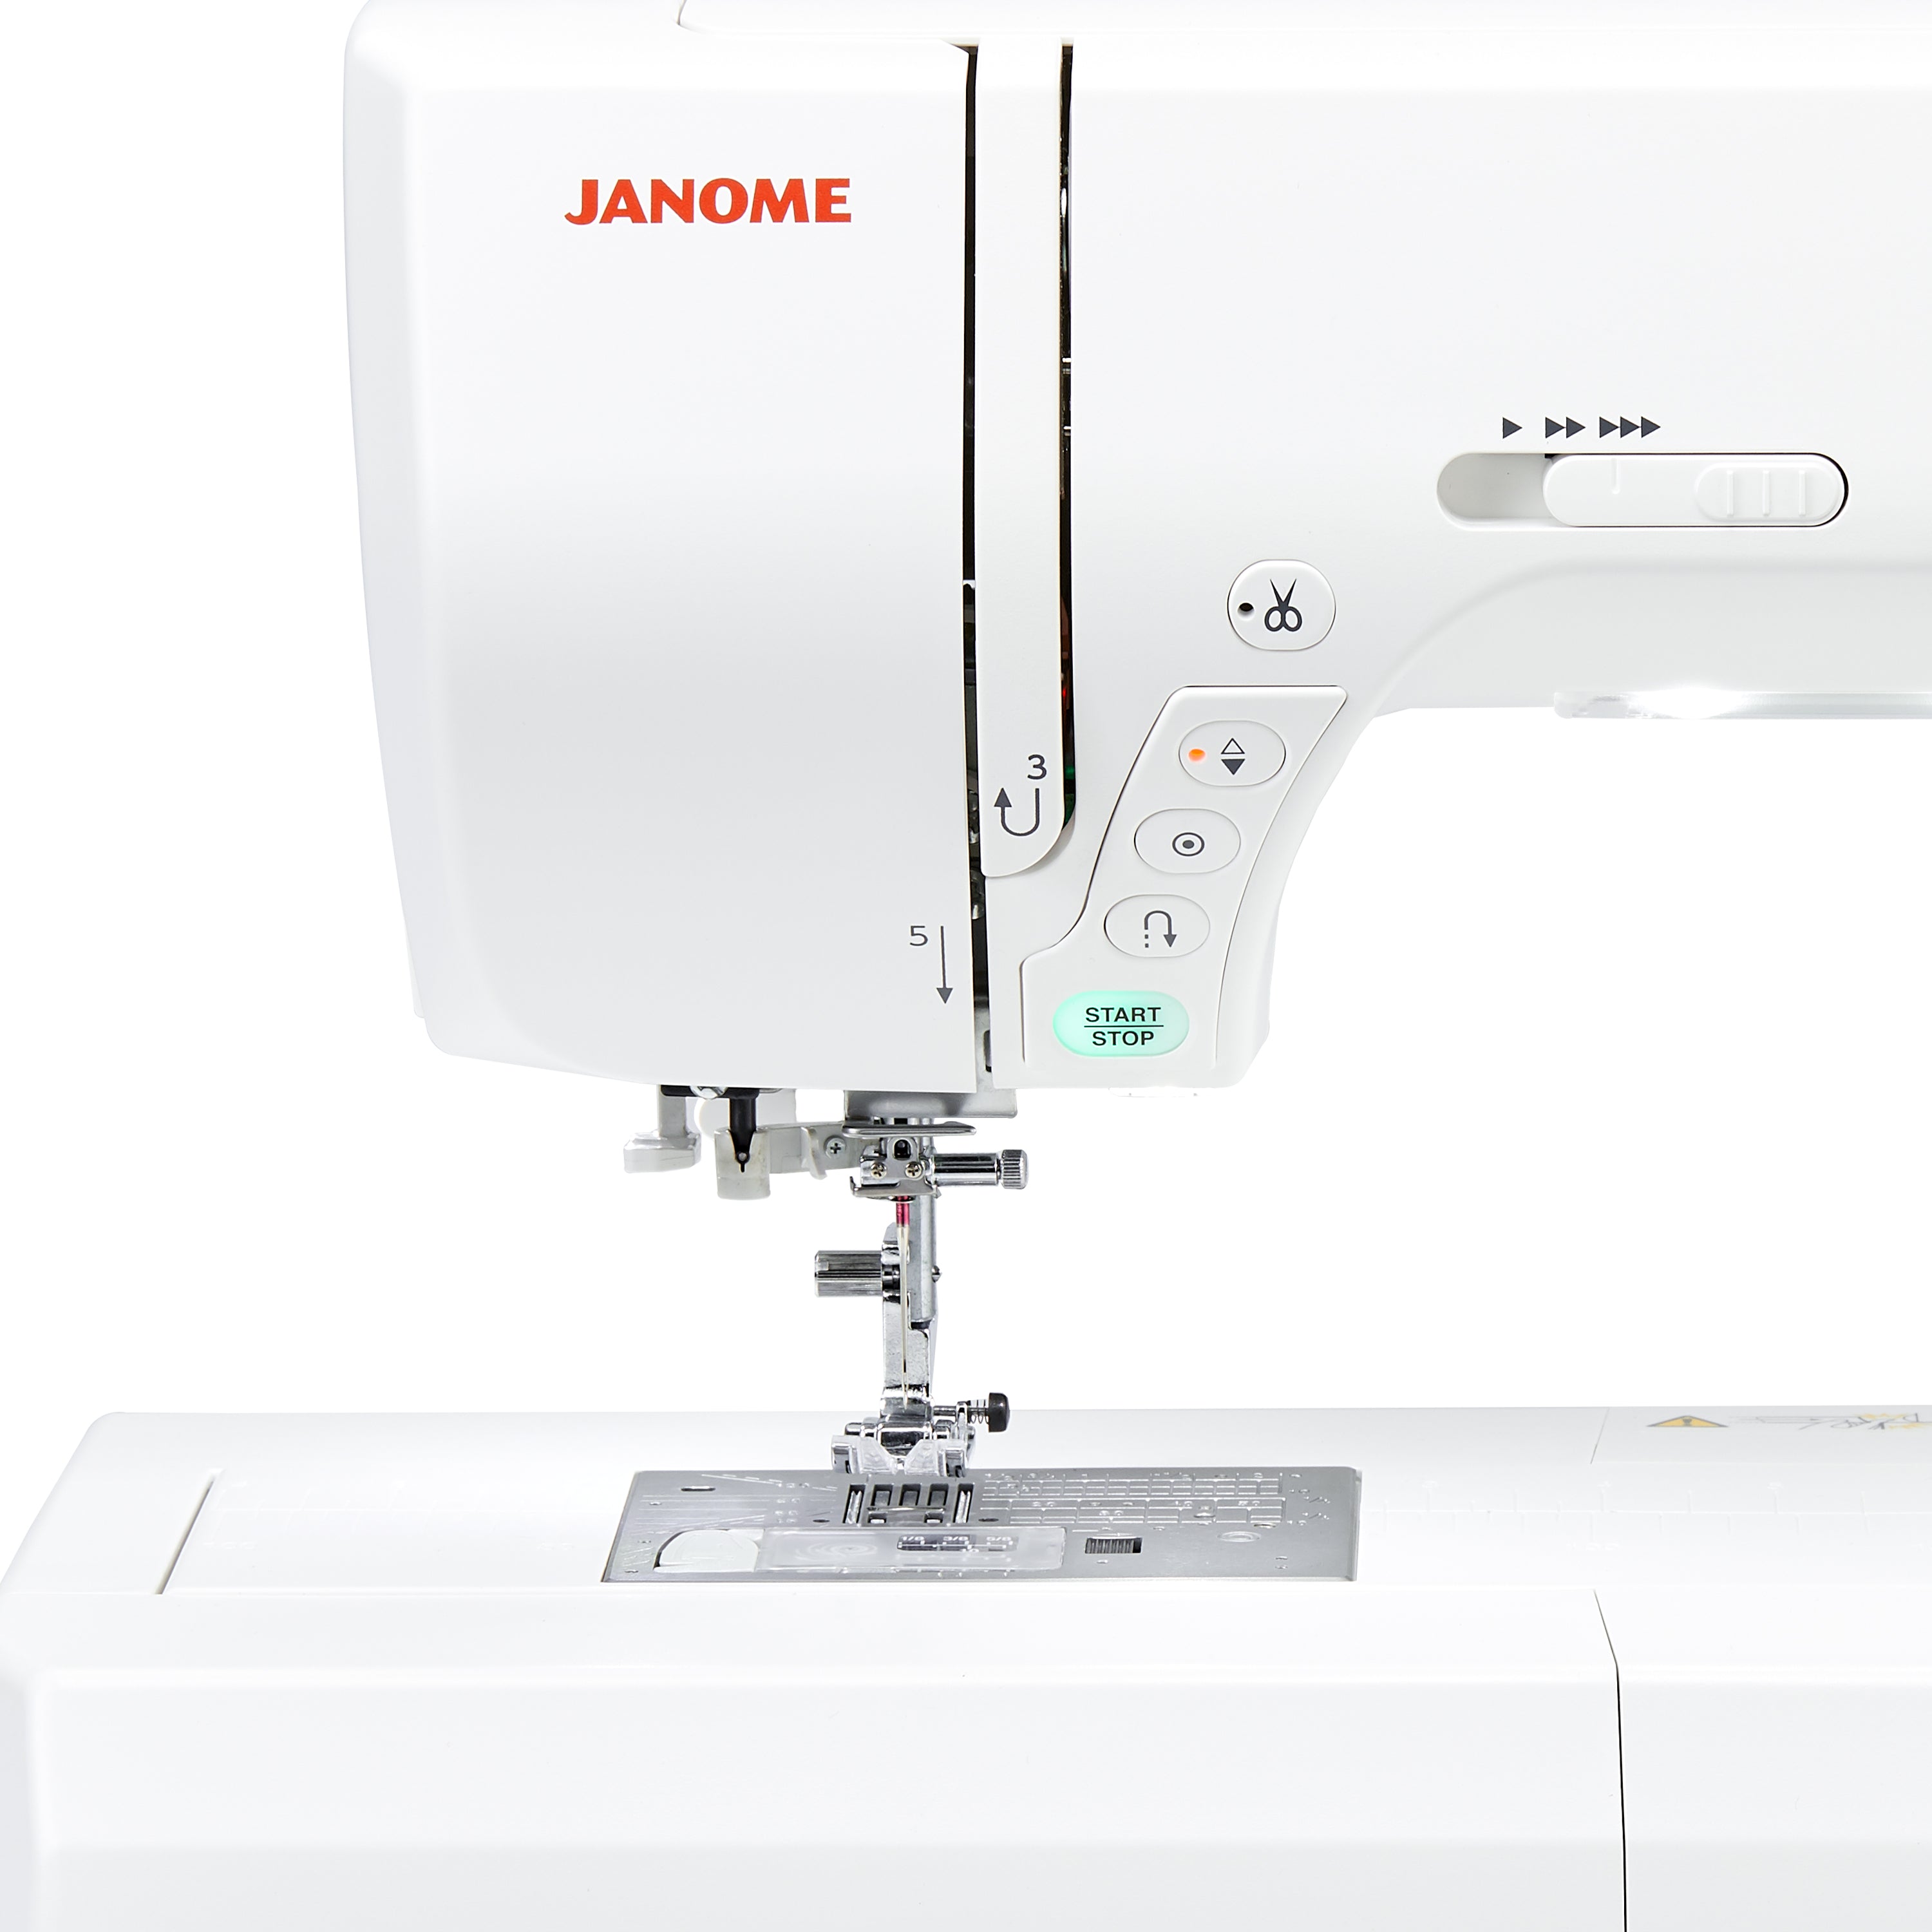 Janome Refurbished Memory Craft 9850 Sewing and Embroidery Machine for Sale at World Weidner